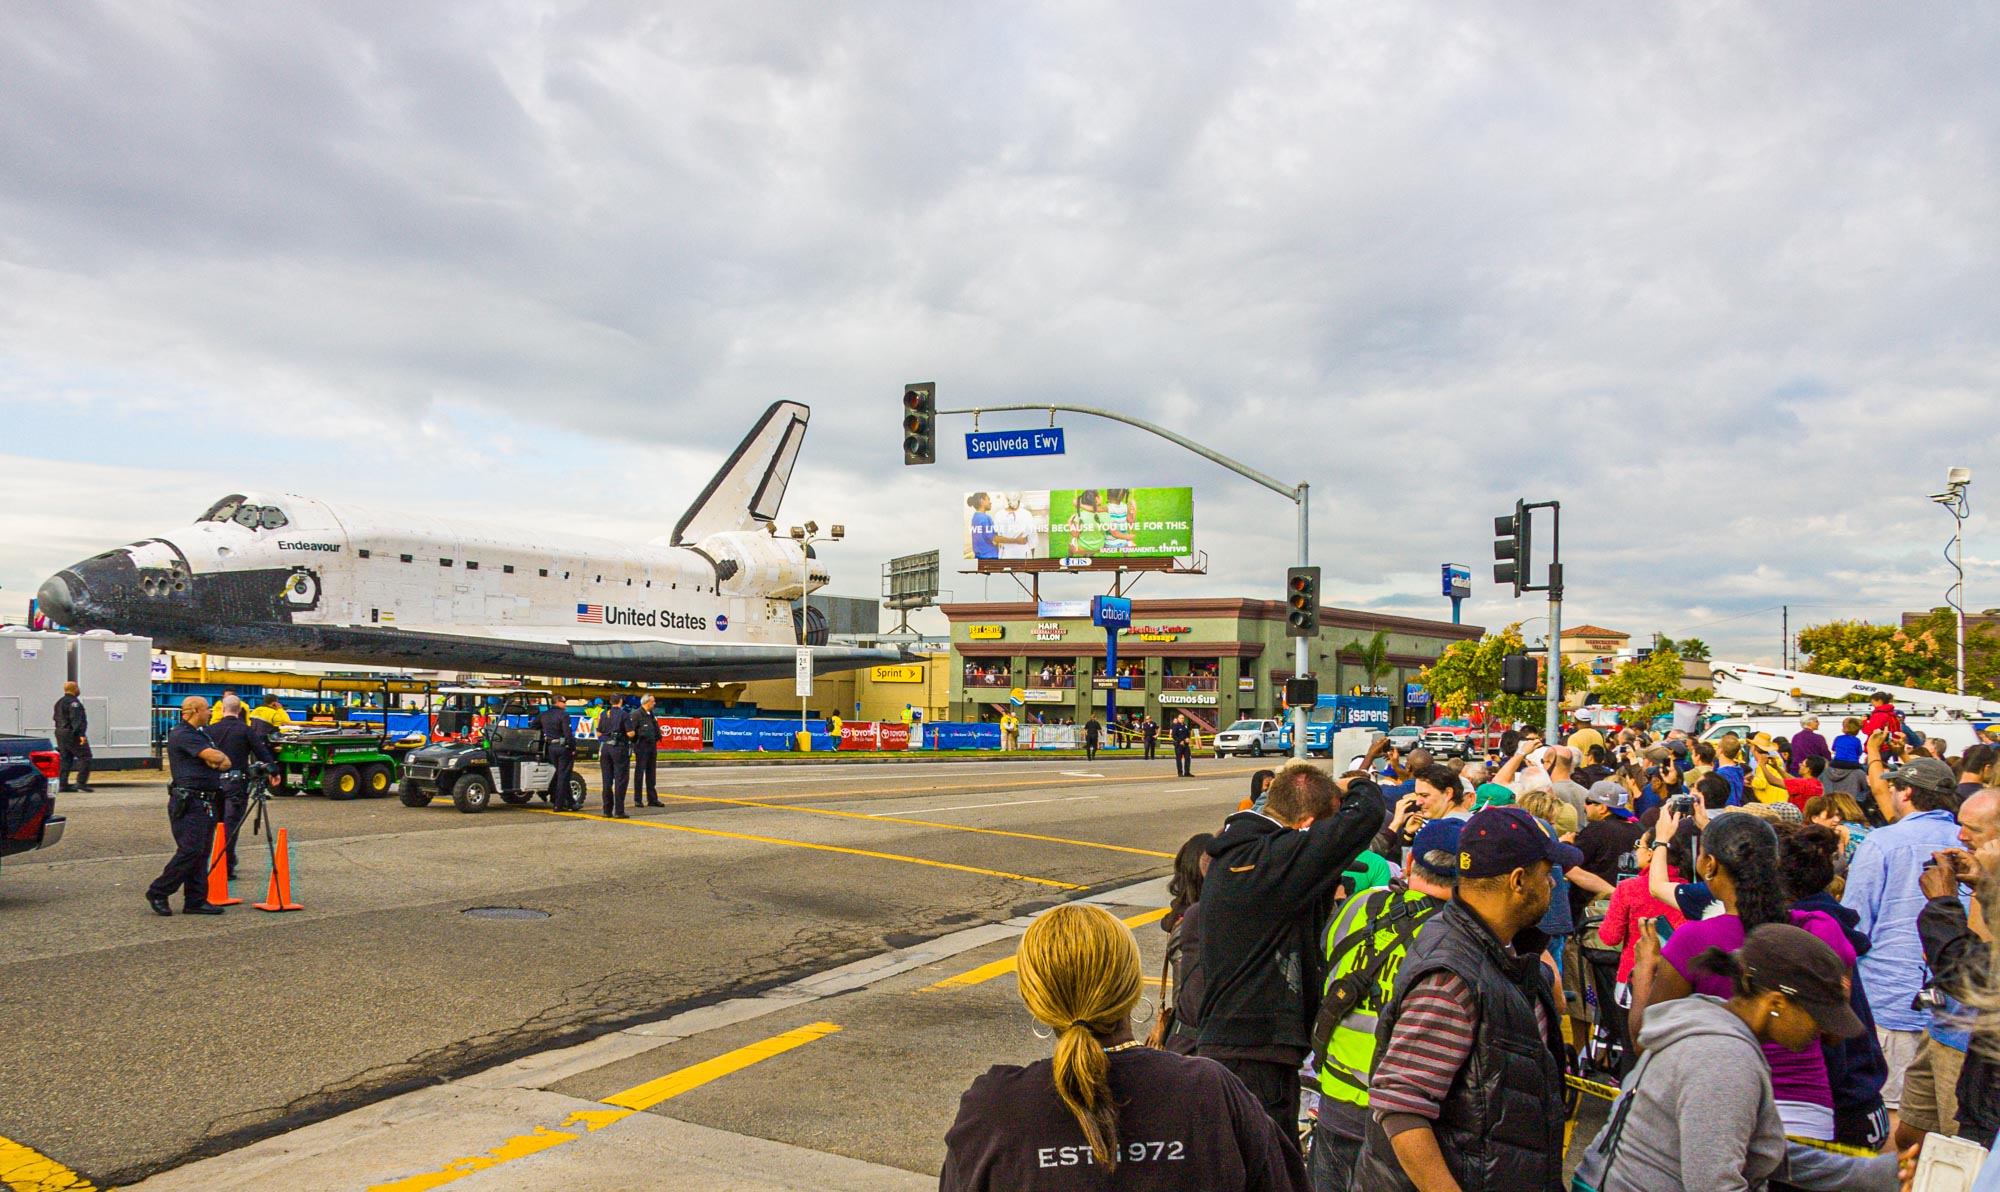 Space Shuttle Endeavour Moves Through Streets of Los Angeles